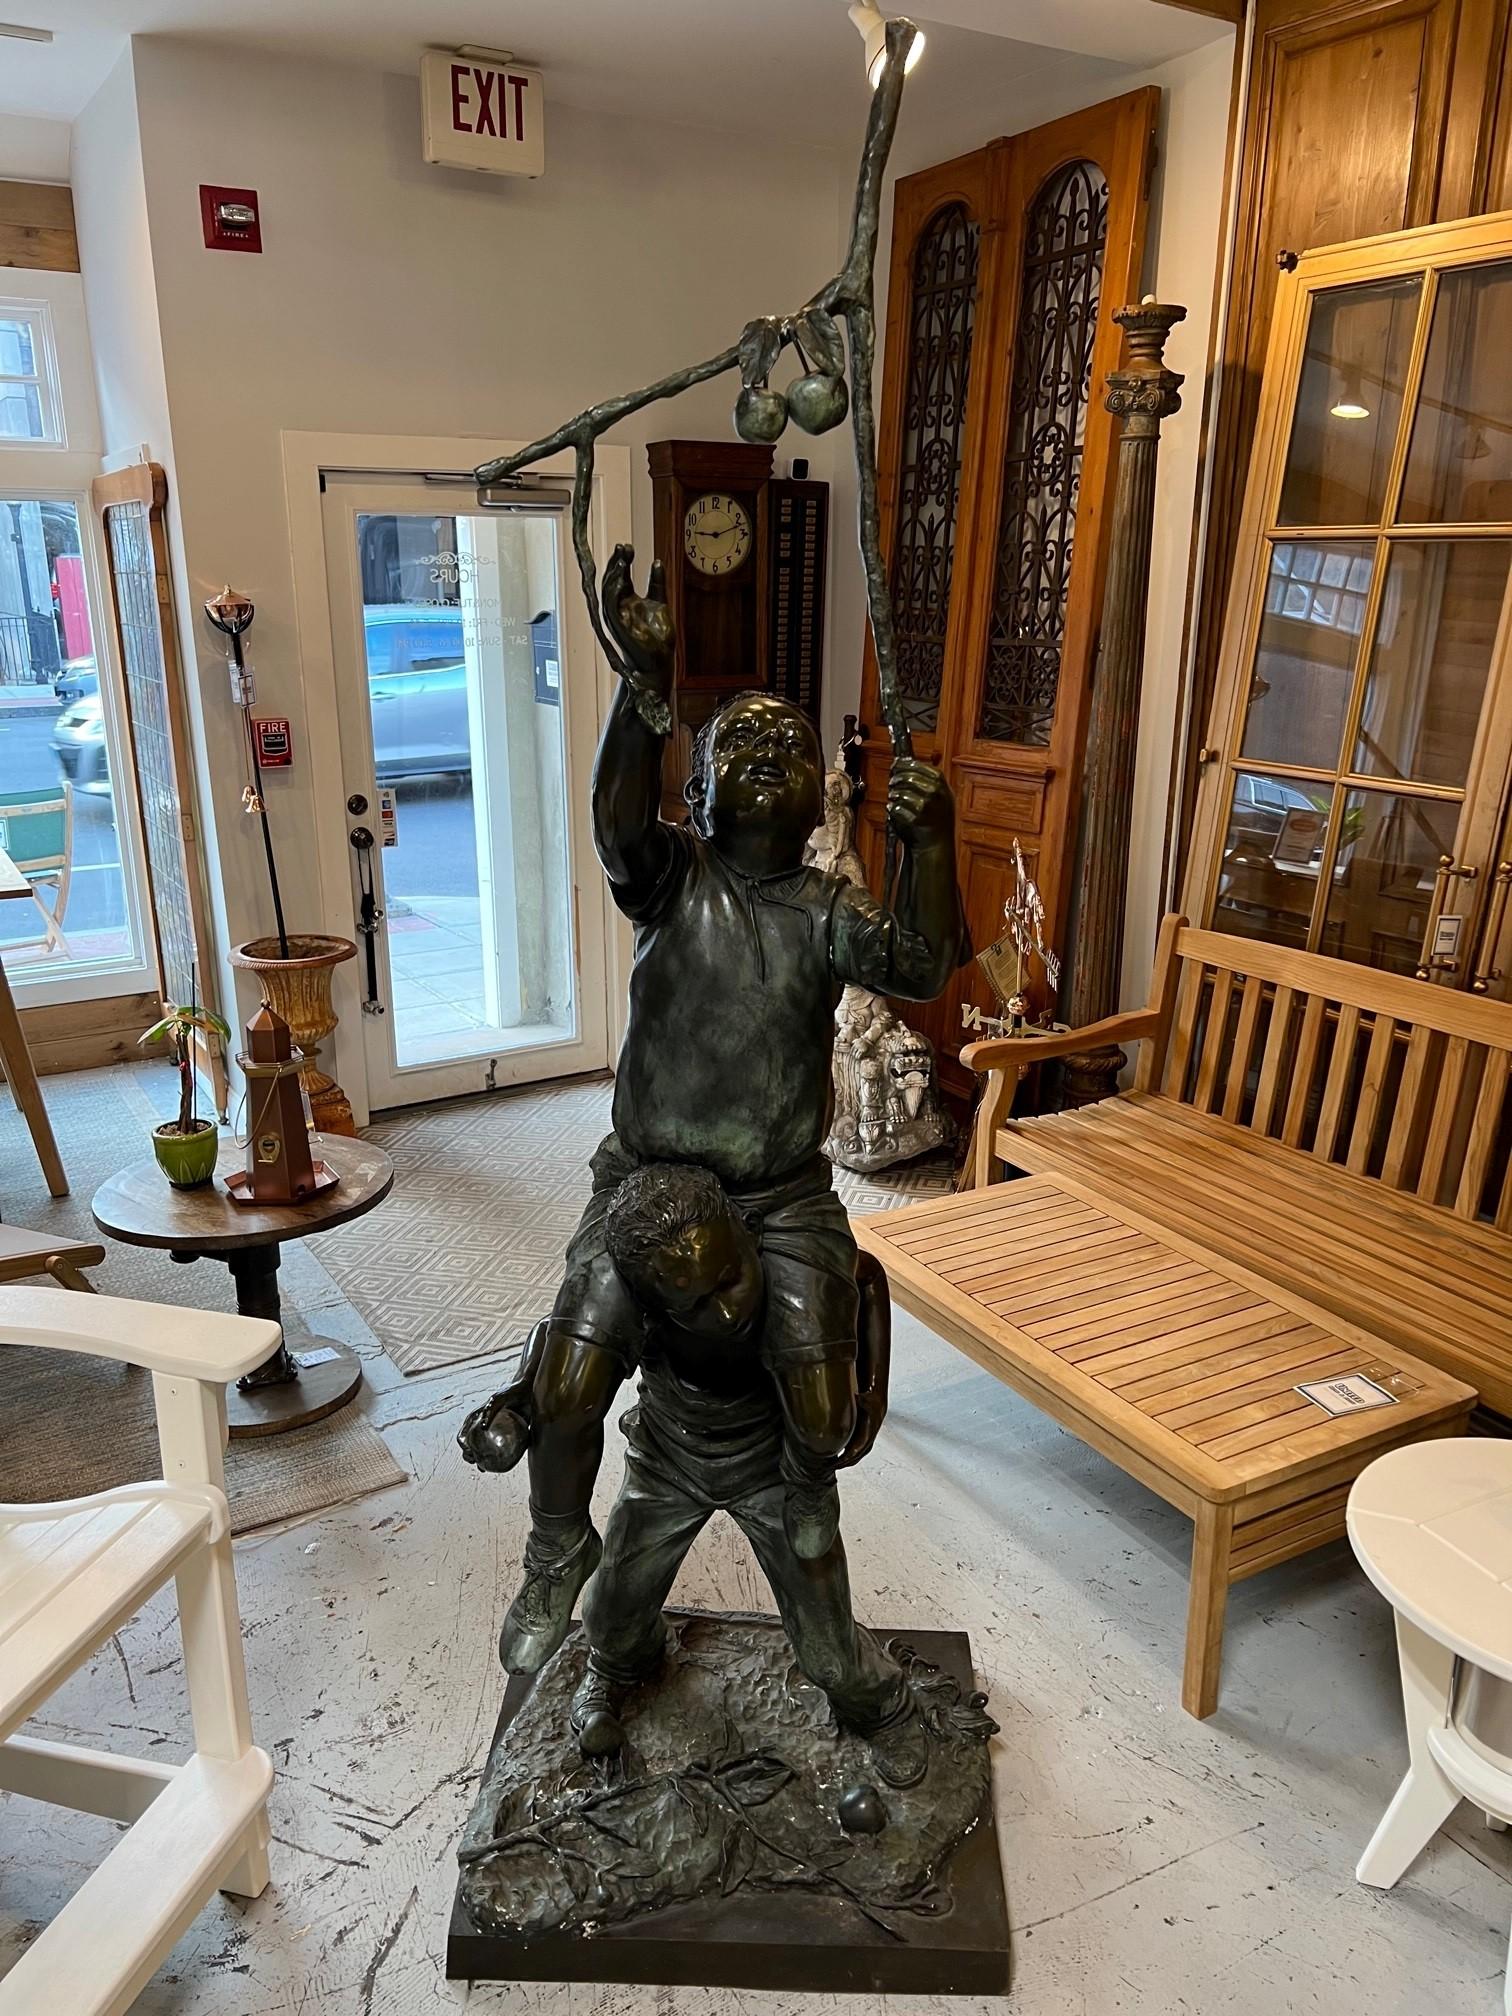 Late 20th century bronze statue of two boys trying to pick apples. This is a fun bronze that would look great in any garden or yard. The bronze does have some scuff marks and scratches but overall in good condition. It does have a signature Jim